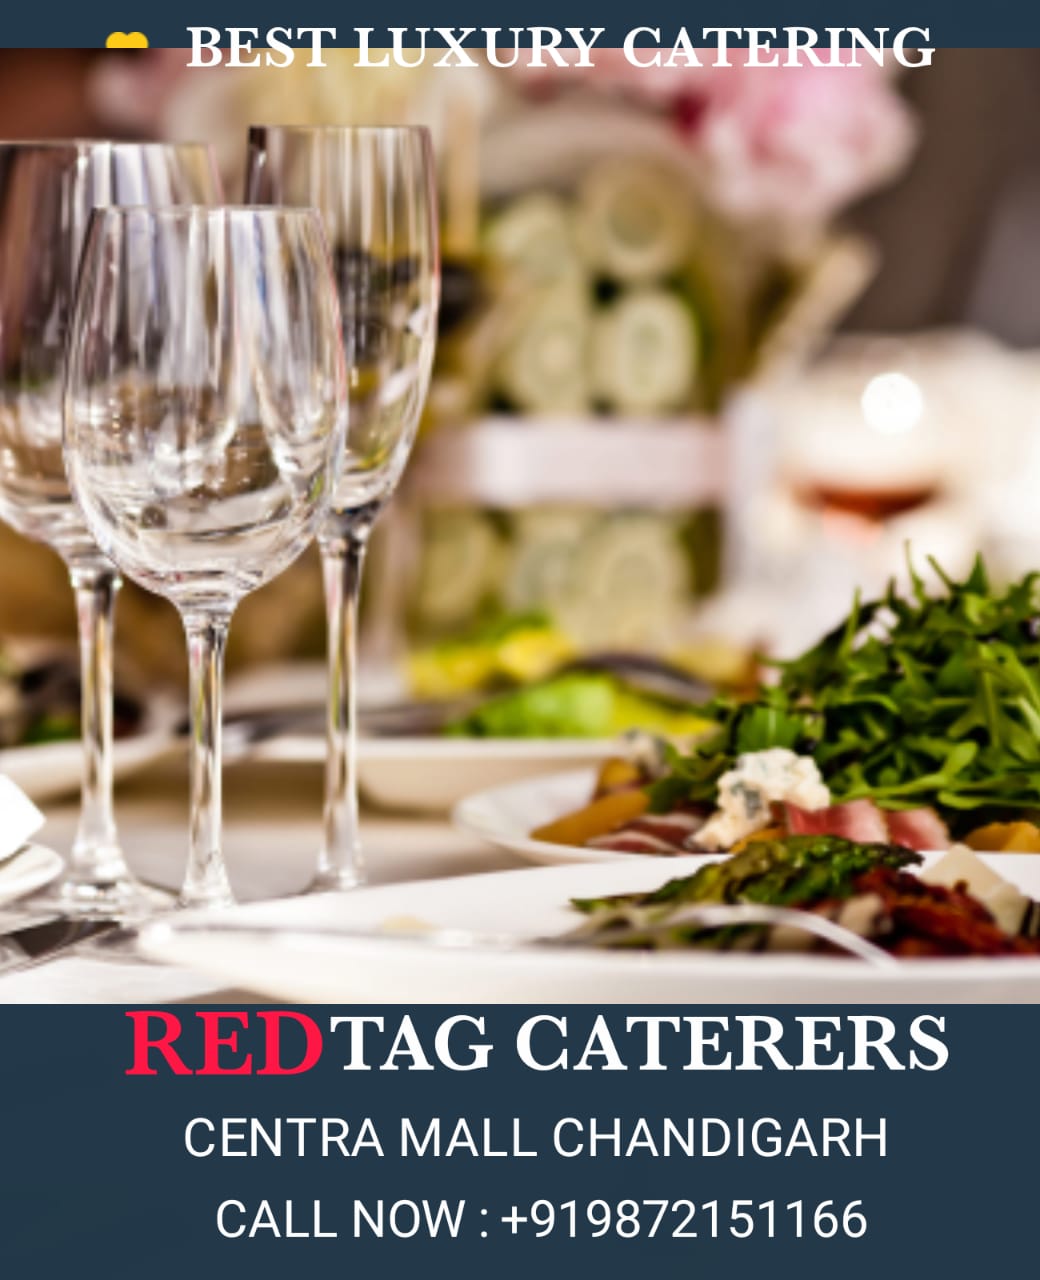 Best catering services in Chandigarh or near. | Red Tag Caterers | Best catering services in Chandigarh, vegetarian catering services in Chandigarh, non vegetarian catering services in Chandigarh, birthday party catering services in Chandigarh, marriage catering serv - GL47267